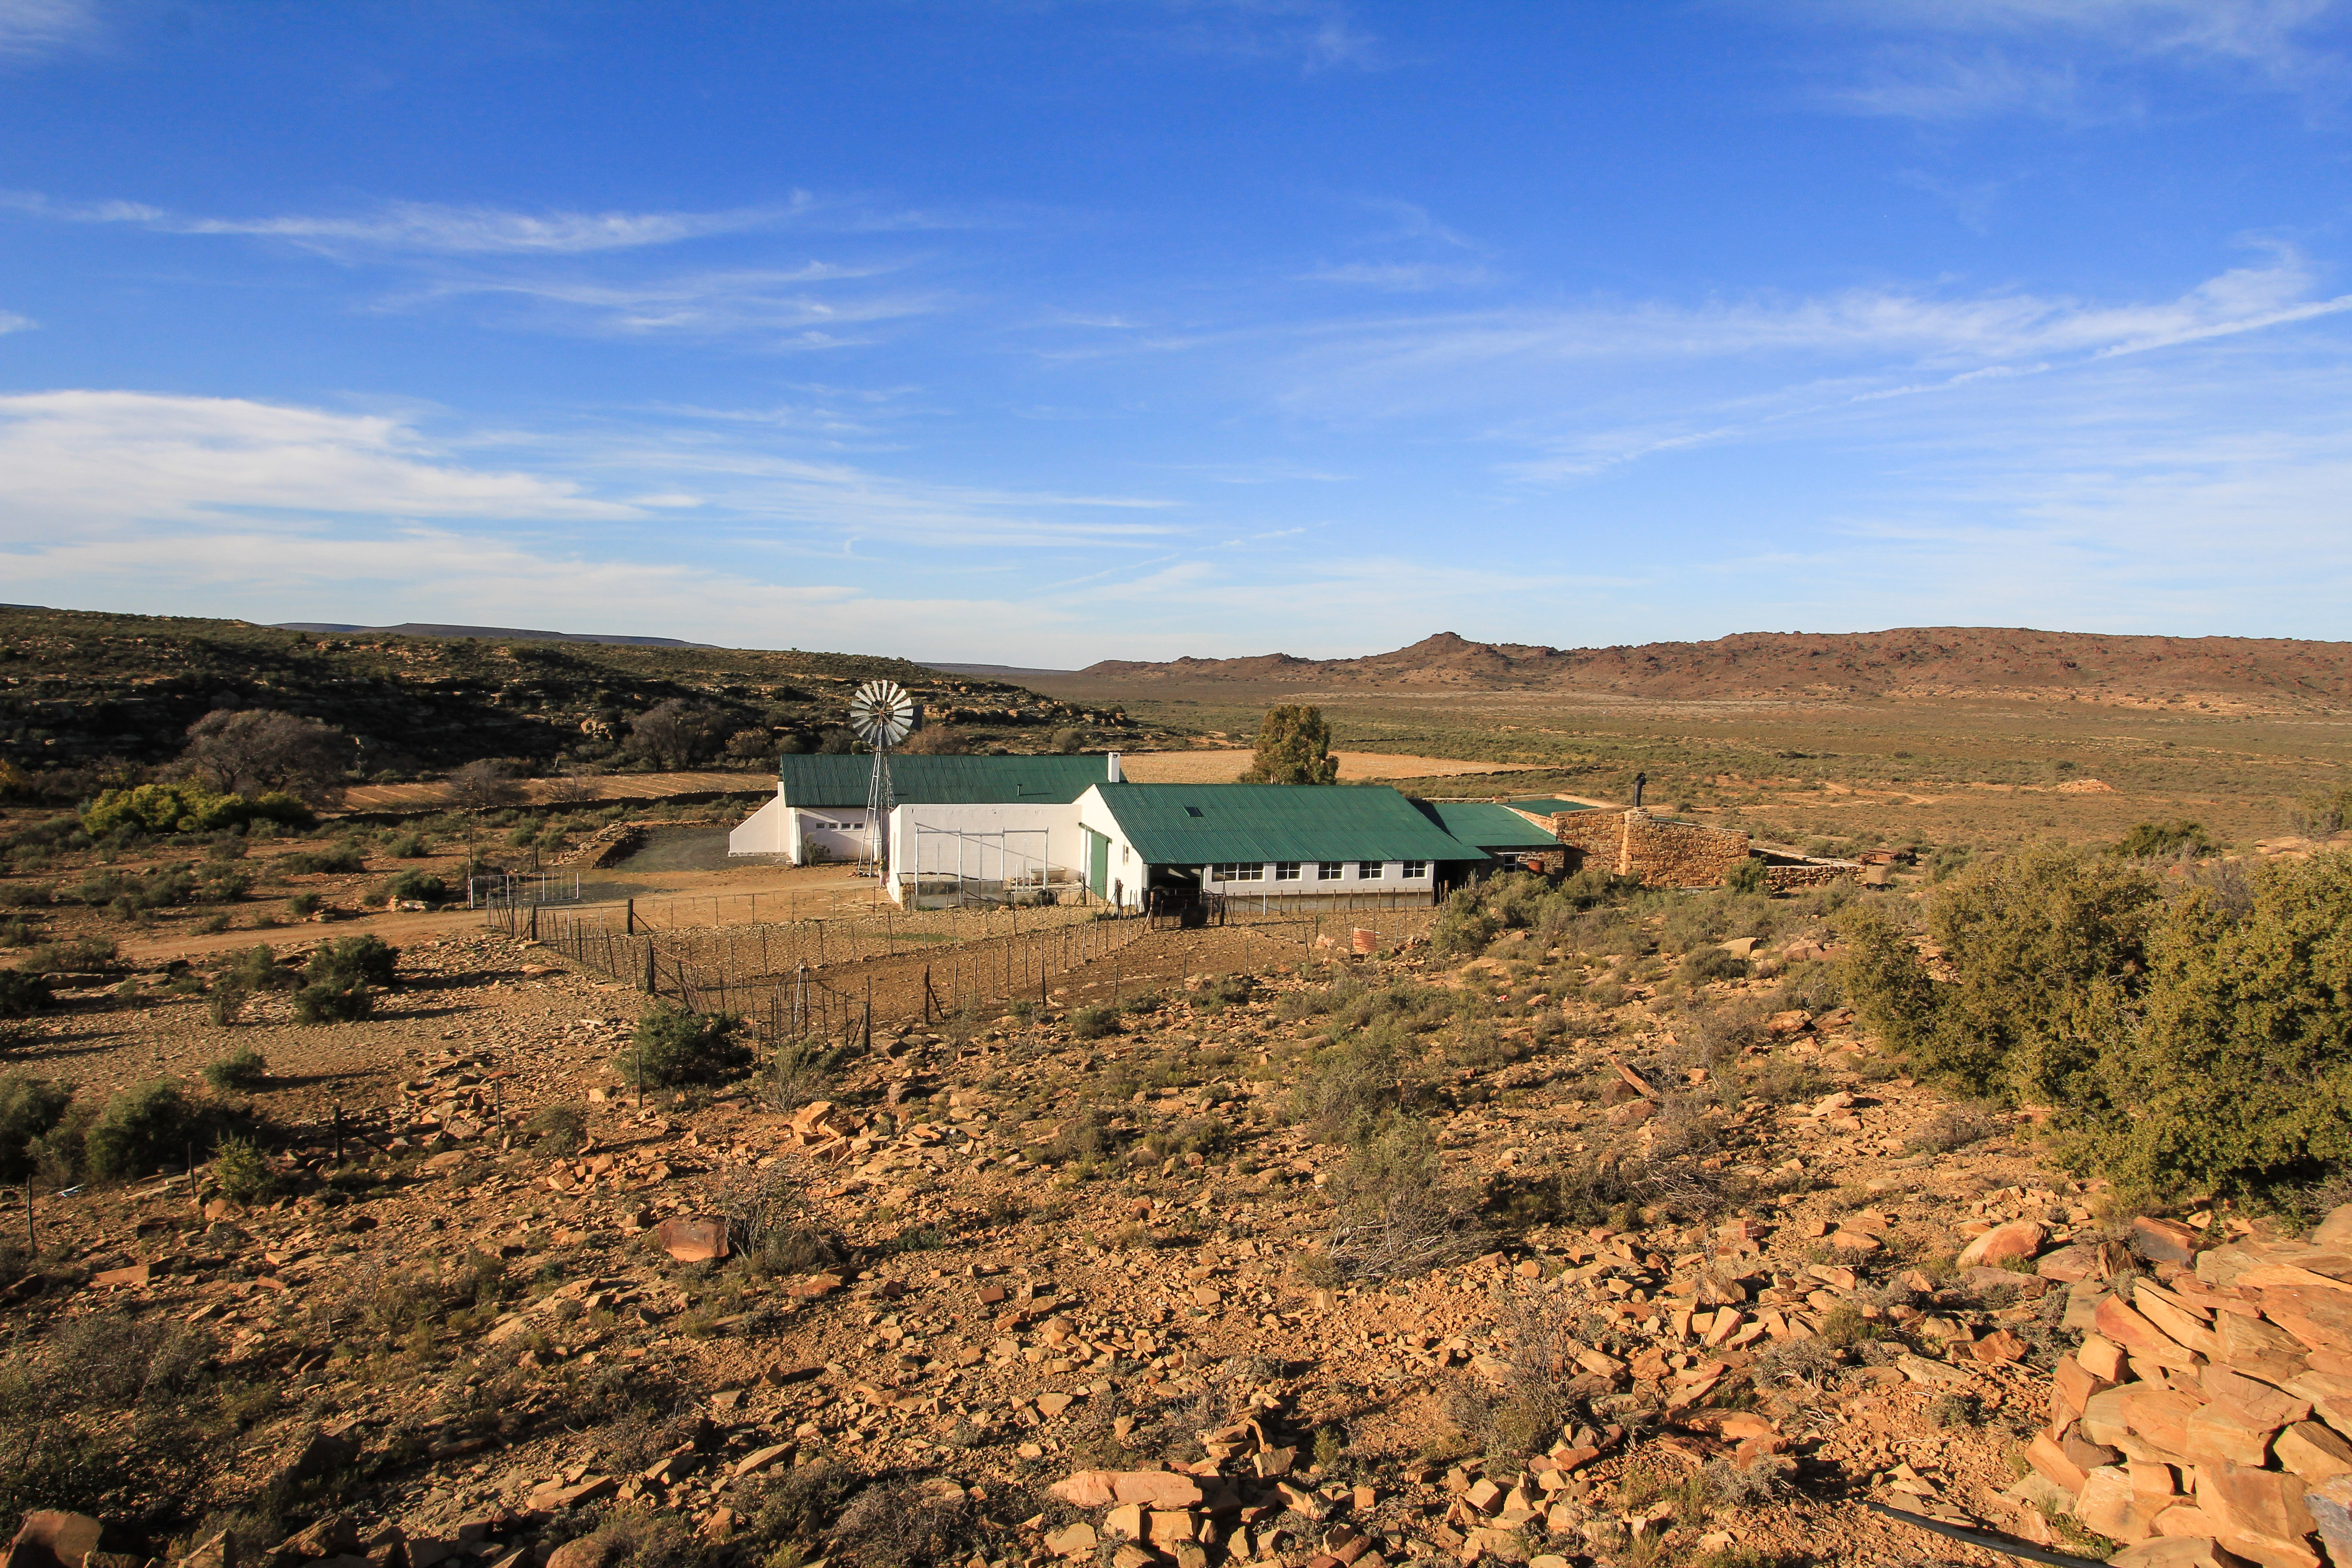 The farmstead at Canariesfontein, with its well-maintained wind pump – in true Hugo tradition. Image: Chris Marais